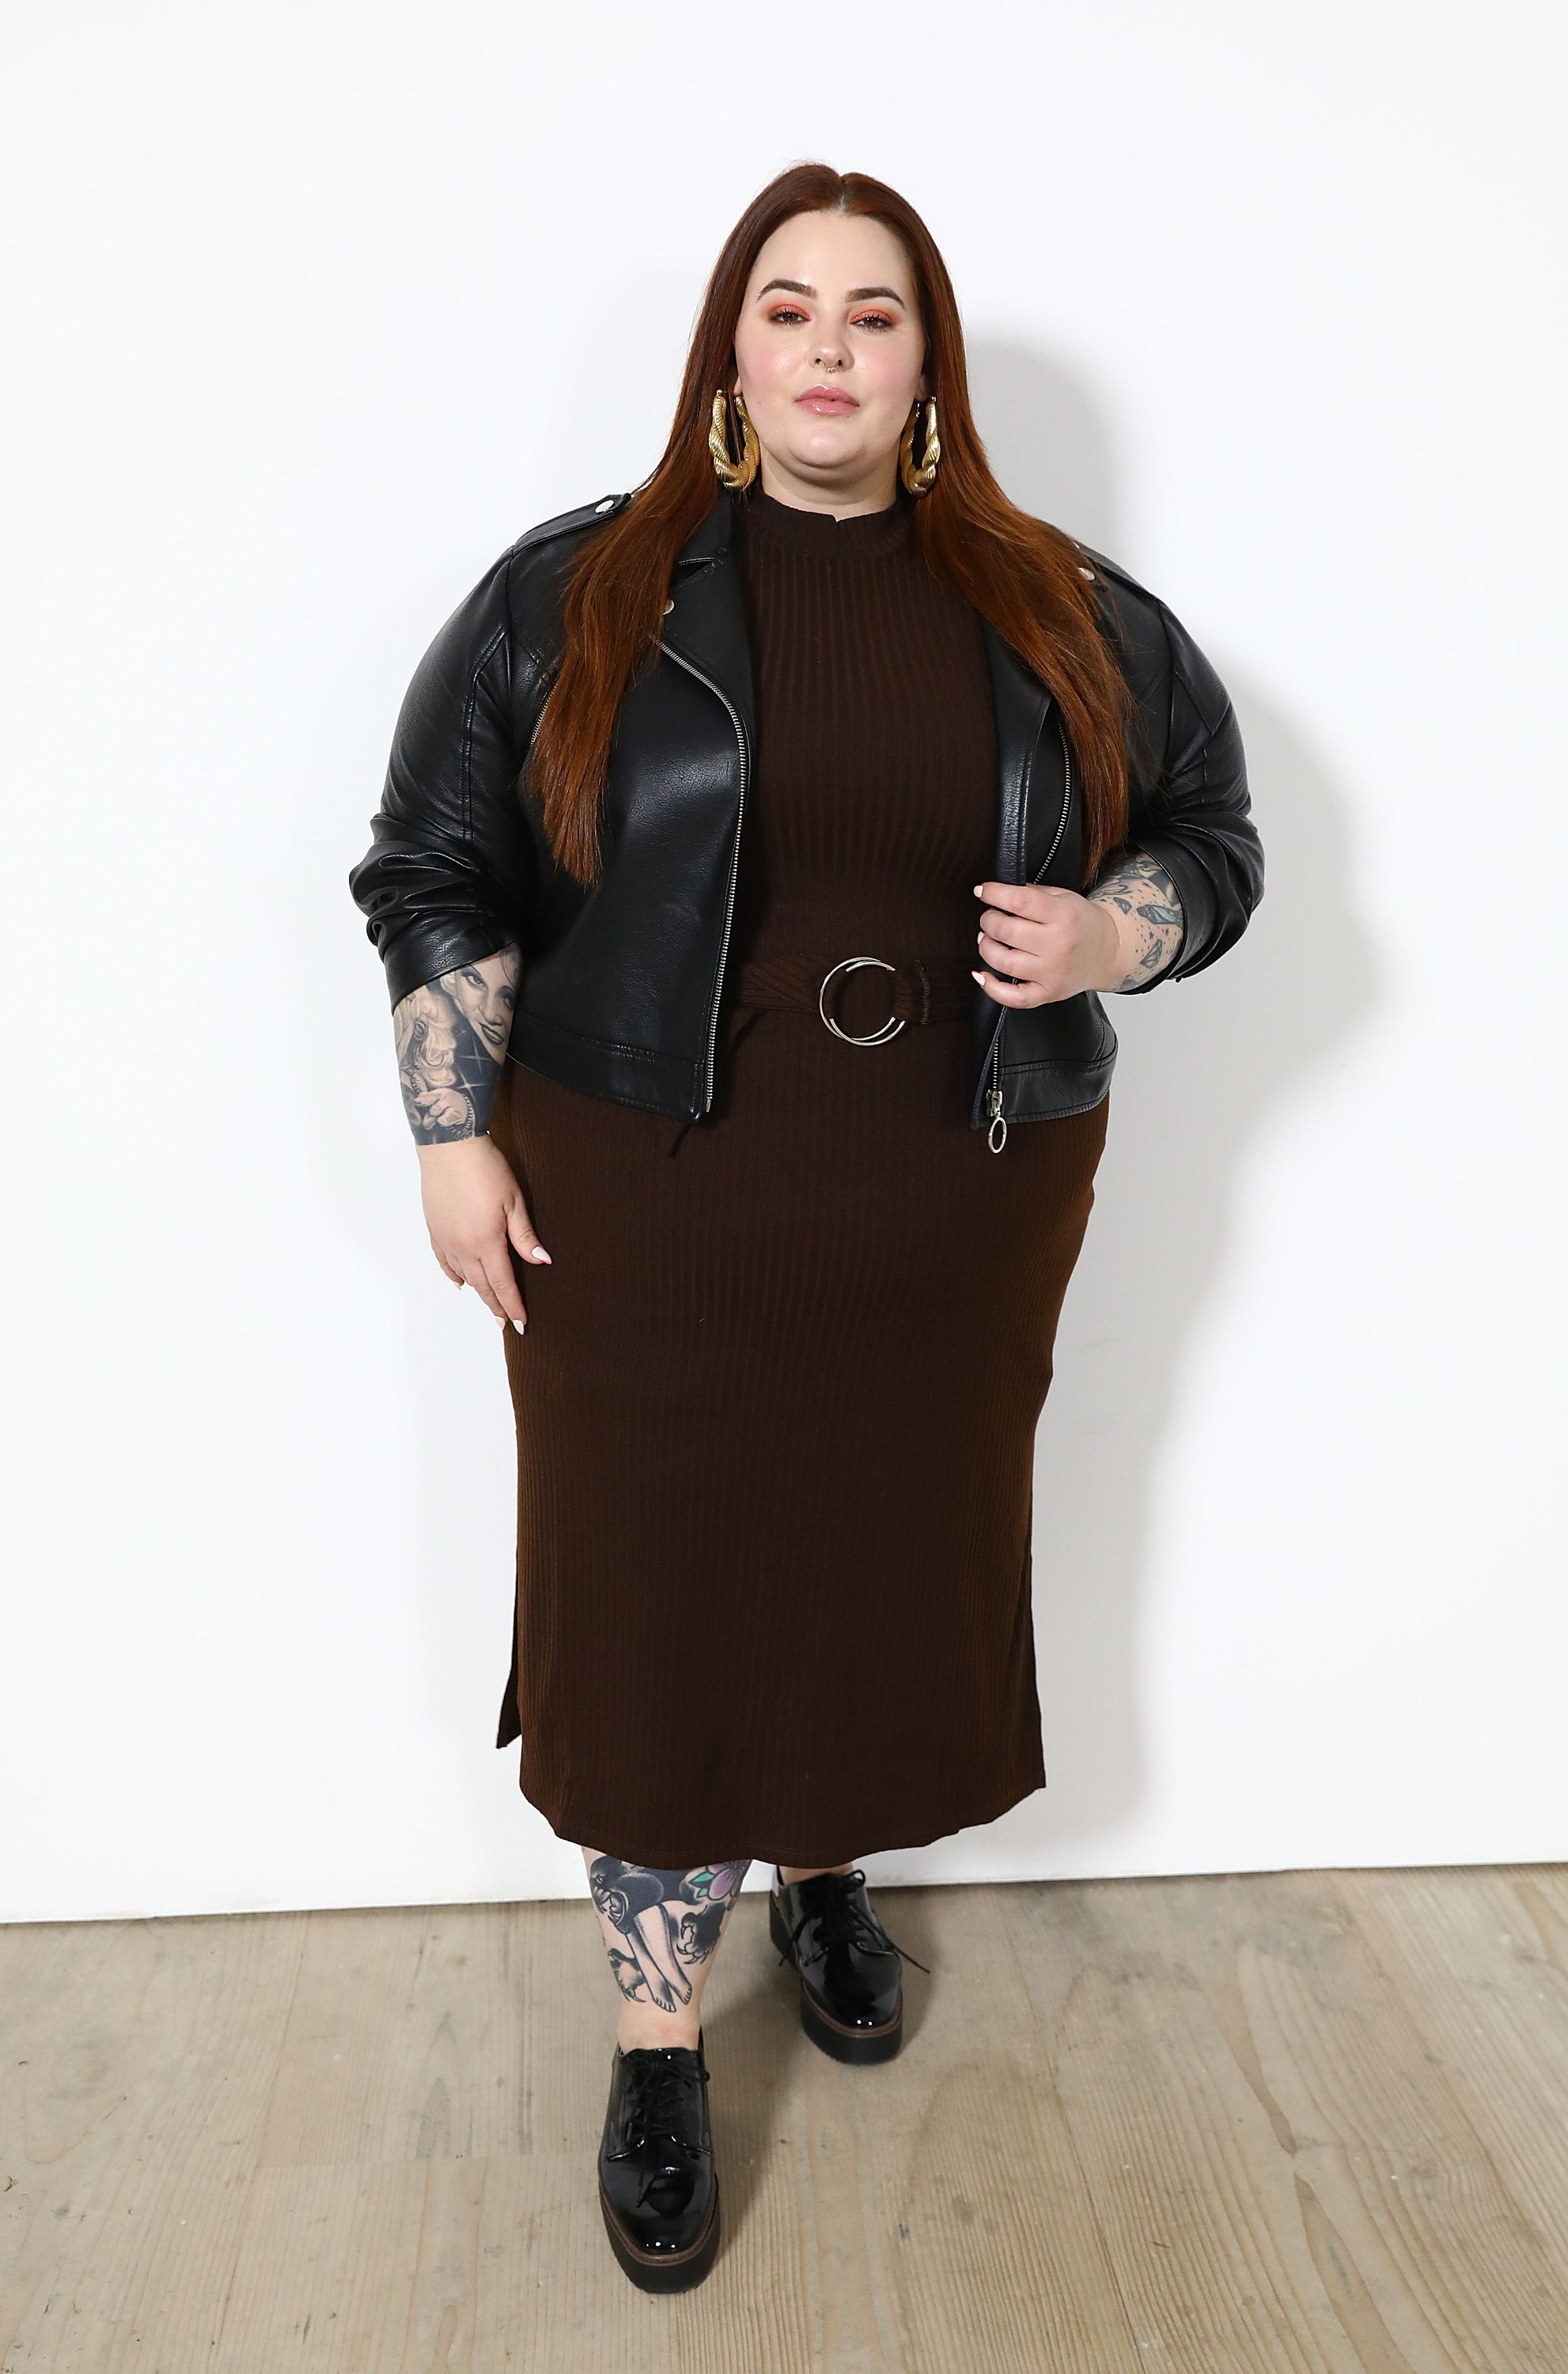 If I saw a body like mine when I was young it would have changed my life   Tess Holliday on her Cosmo cover  Independentie